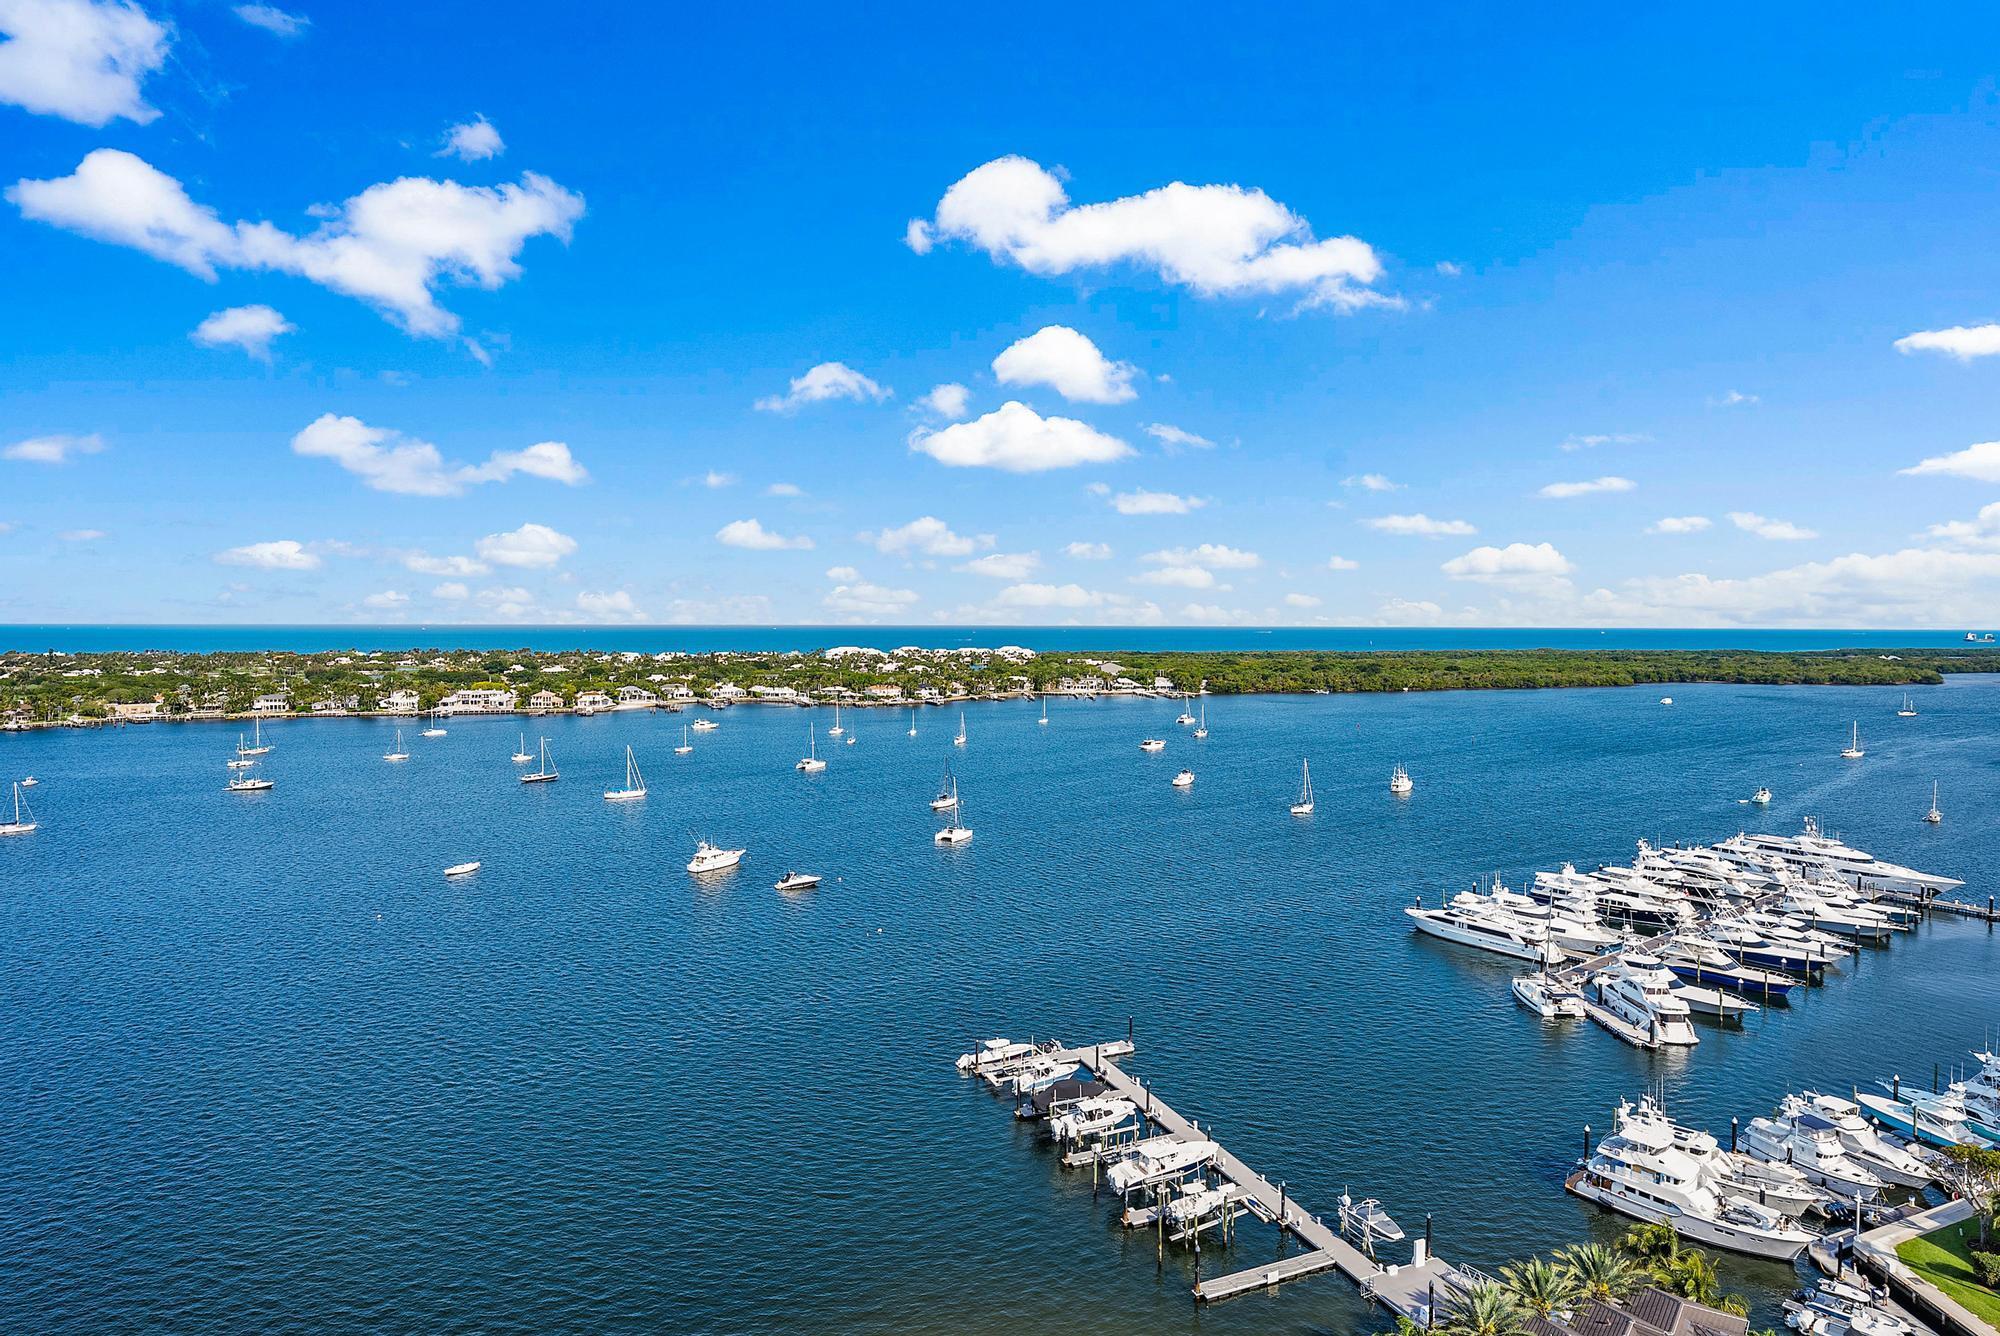 Extraordinary opportunity to buy one of the premier homes in Palm Beach County. 20th floor highly sought after ''Azure unit'' in the coveted Water Club Tower 2. This condo ''line'' is closest to the Intracoastal Waterway offering 2600 sq. ft. under air (3000 total), 3 Bedrooms + Den (can be 4th Bedroom) & 4 full baths, with panoramic totally unobstructed ocean & intracoastal views (east, west, north & south) from one of the top floors of the water club. Fully renovated from floor to floor w/ $250,000 plus in upgrades (custom cabinetry, wall coverings, lighting, stretch ceiling, built in desk and cabinetry etc.)  Bright open floor plan w/ floor-to-ceiling windows in every room. Living Room opens to an oversized ocean view terrace. 3rd Bedroom has an additional western facing terrace with..